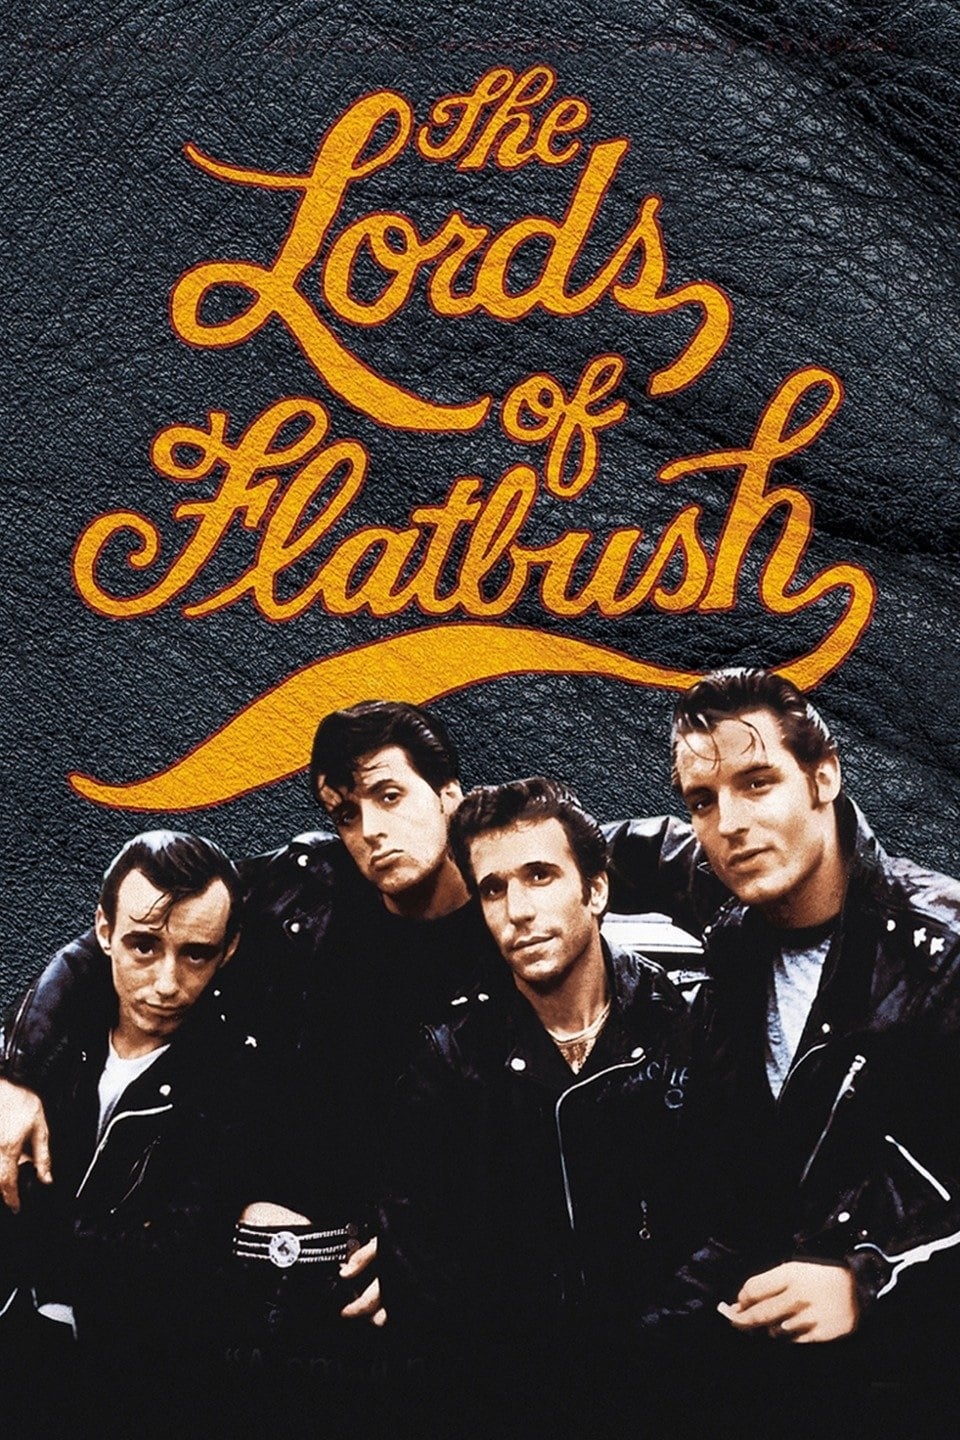 The Lords of Flatbush